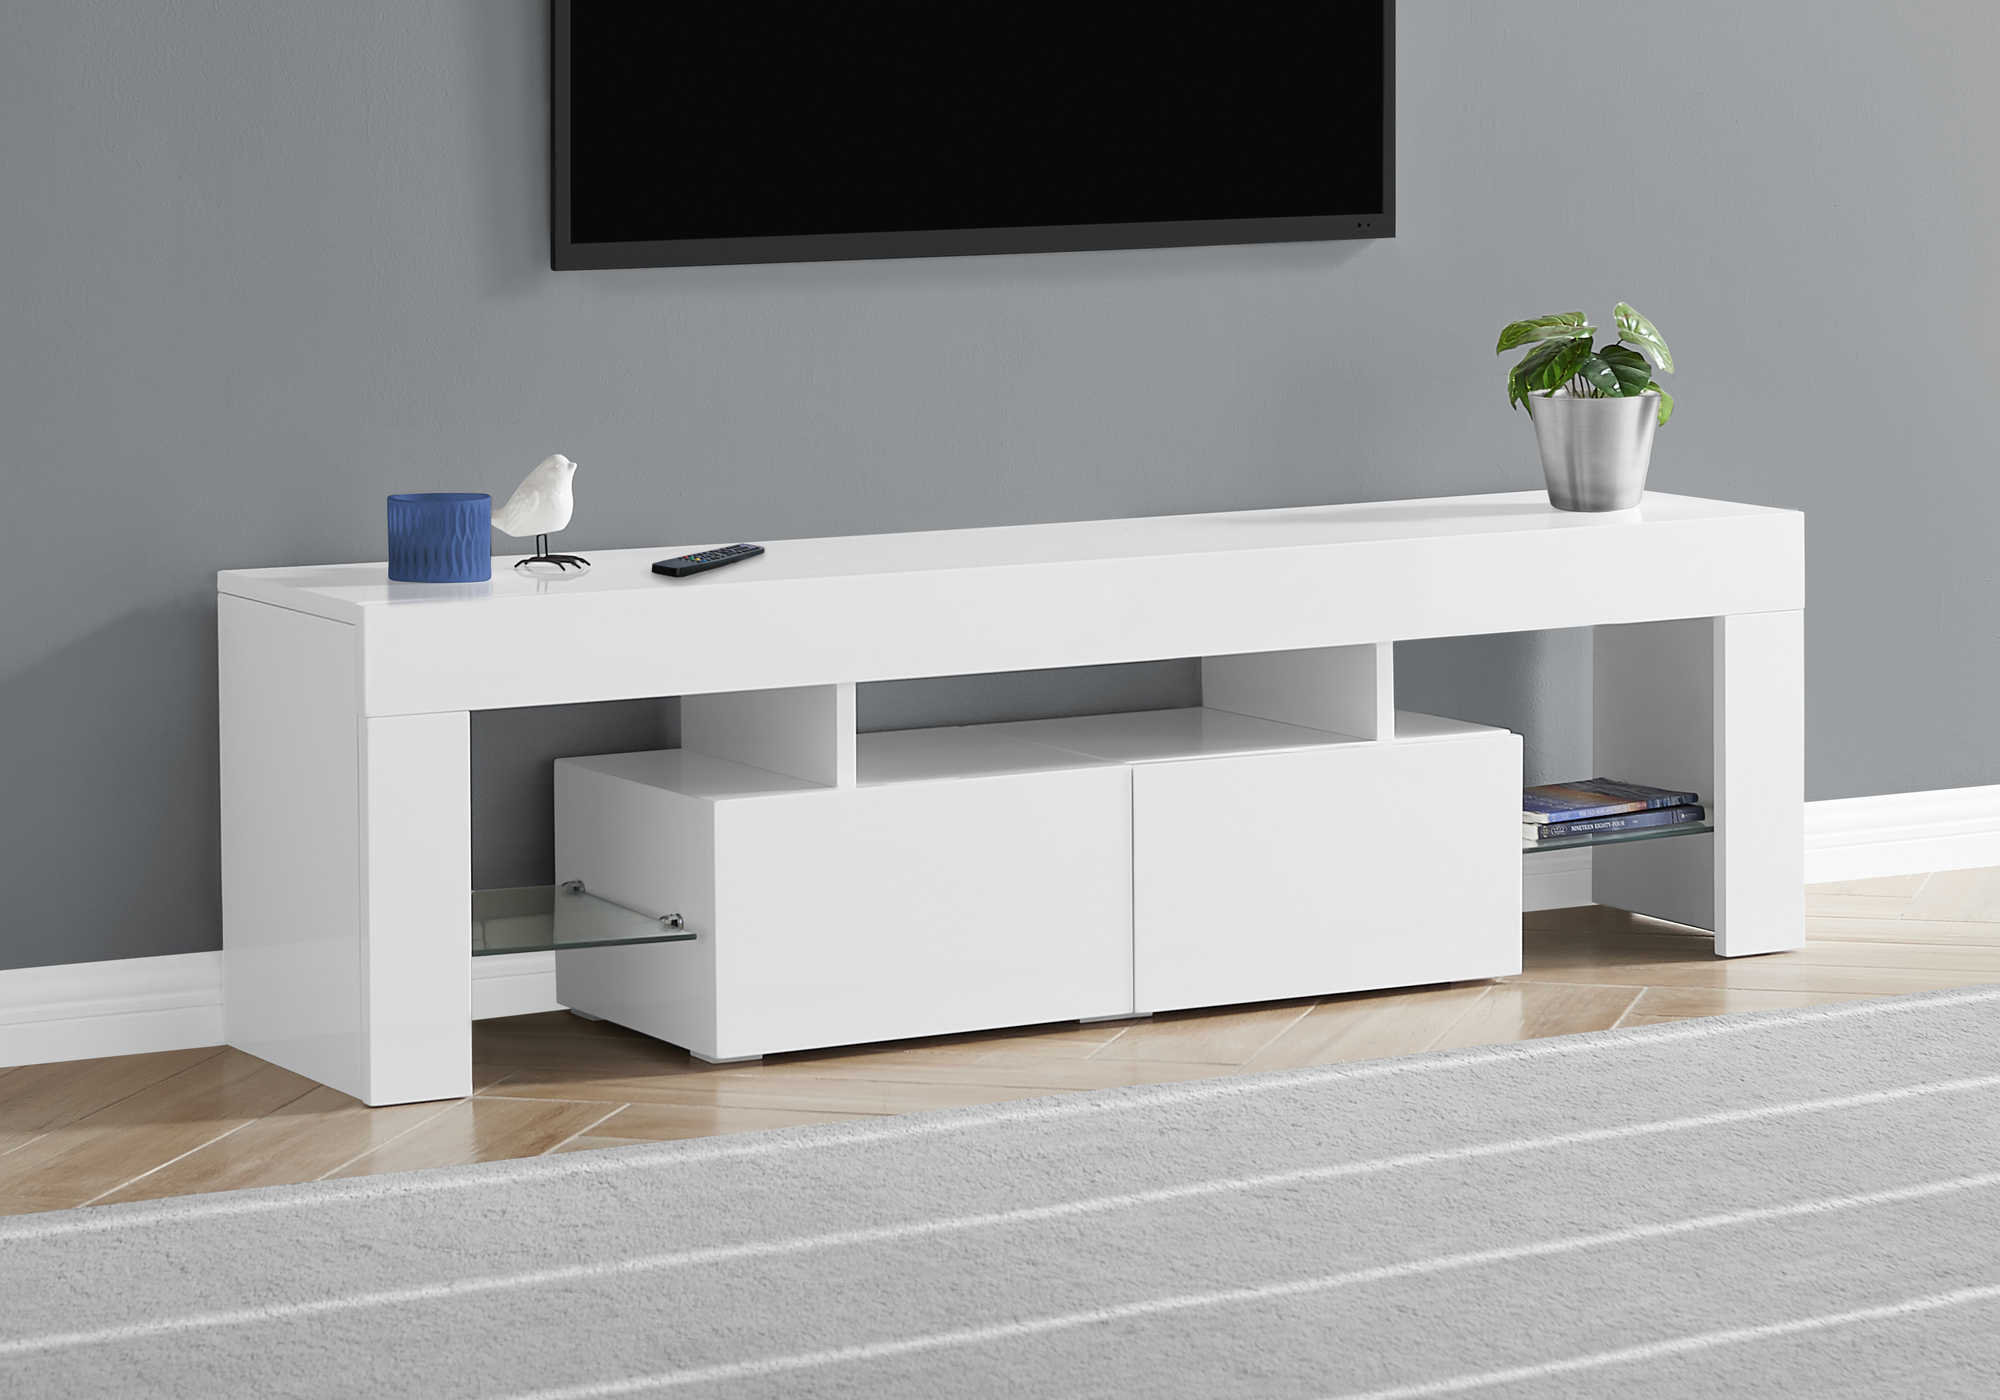 TV STAND - 63"L / HIGH GLOSSY WHITE WITH TEMPERED GLASS